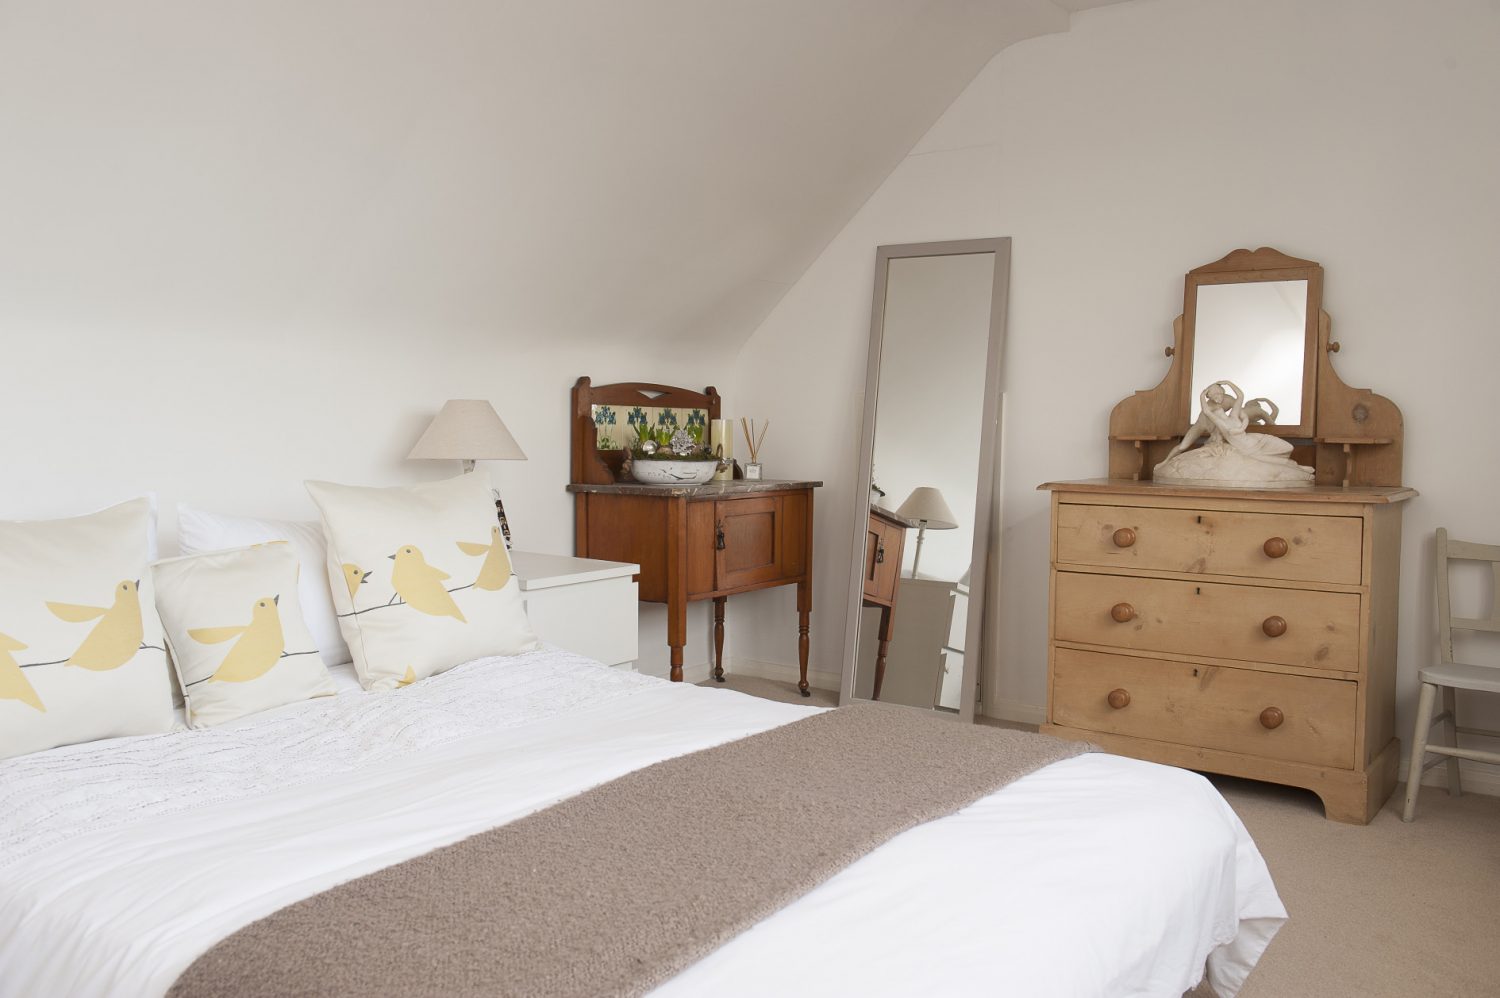 Next to the sitting room, a discreet staircase leads up to a pretty, vaulted guest bedroom